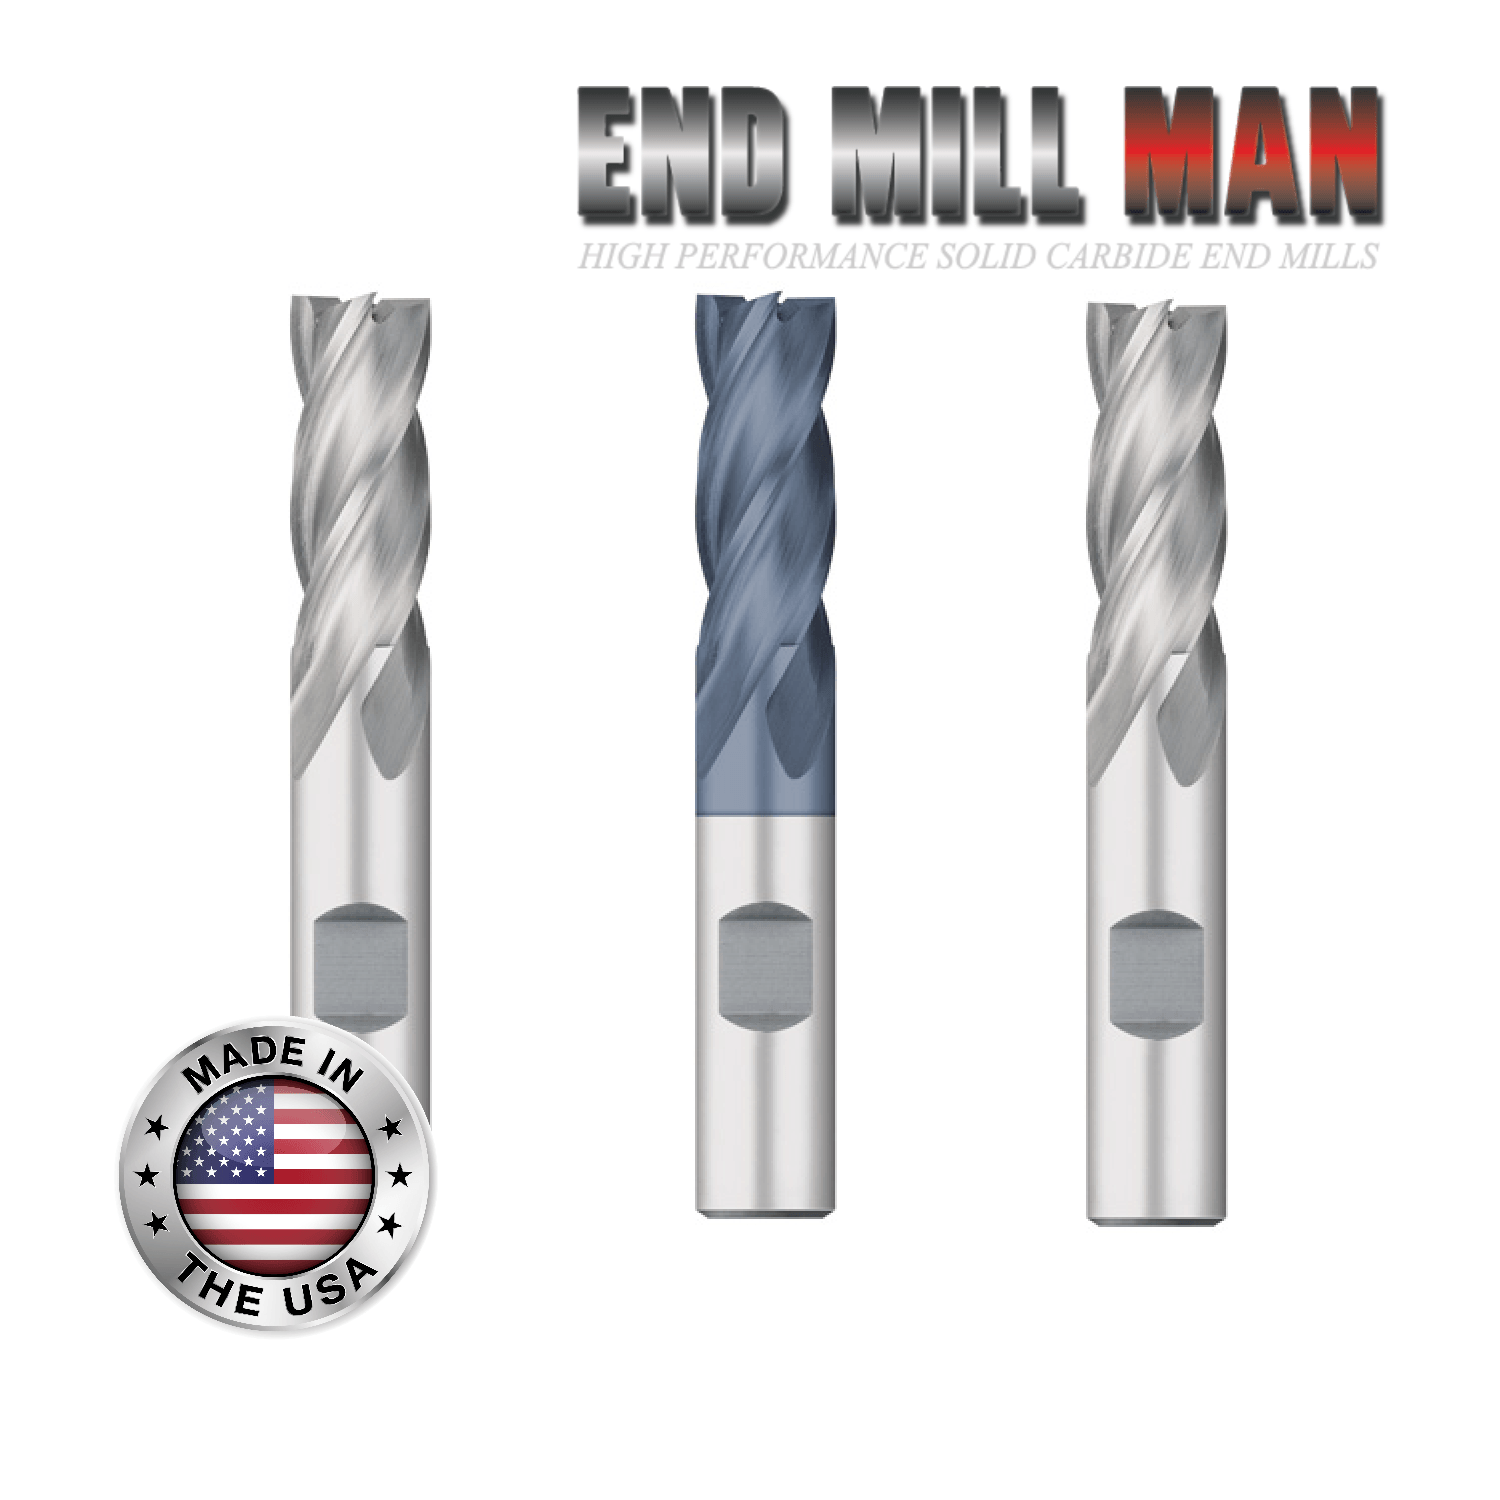 1" x 2" LOC (3 Pack) HSS 4 Flute End Mills (1" Shanks) - The End Mill Store 